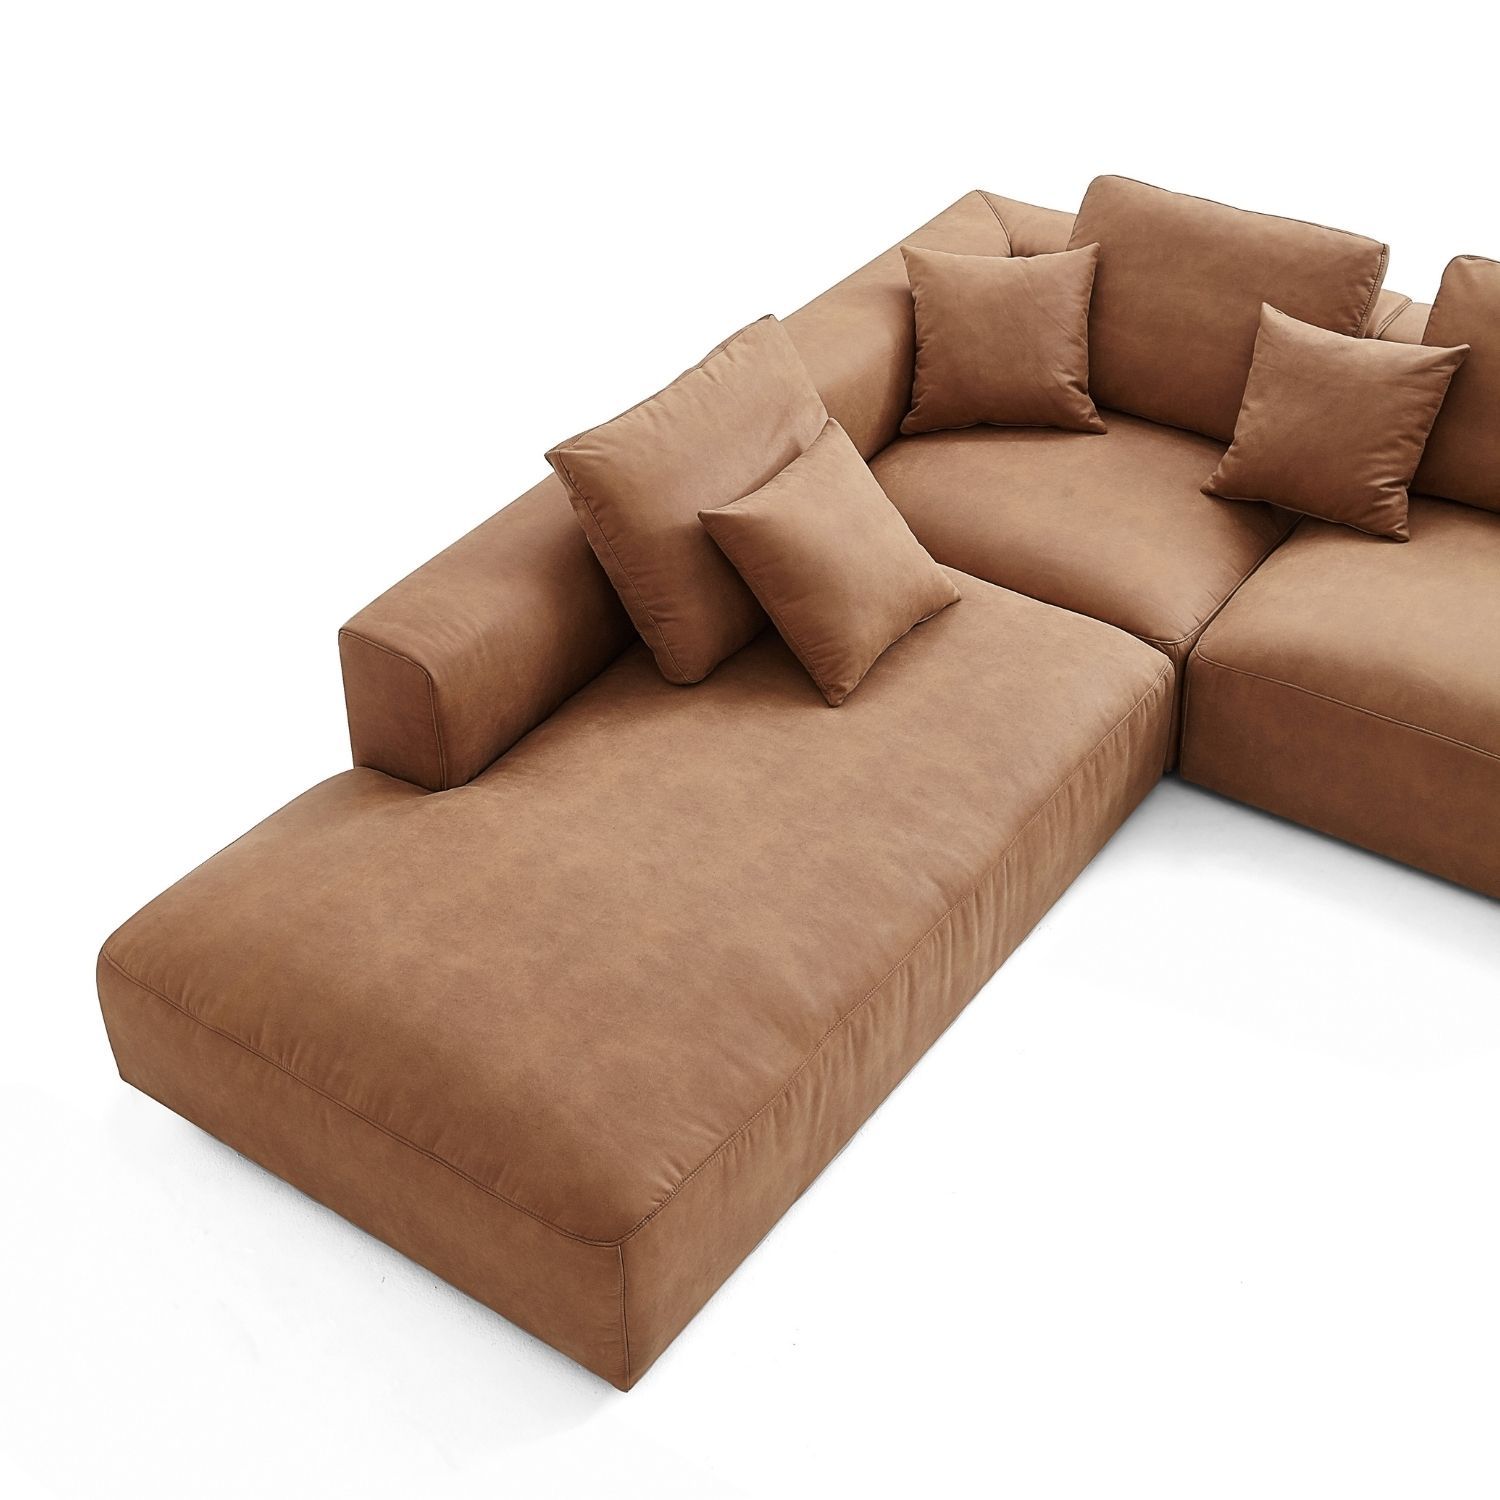 The 5th Open L Sectional Sofa Foundry 